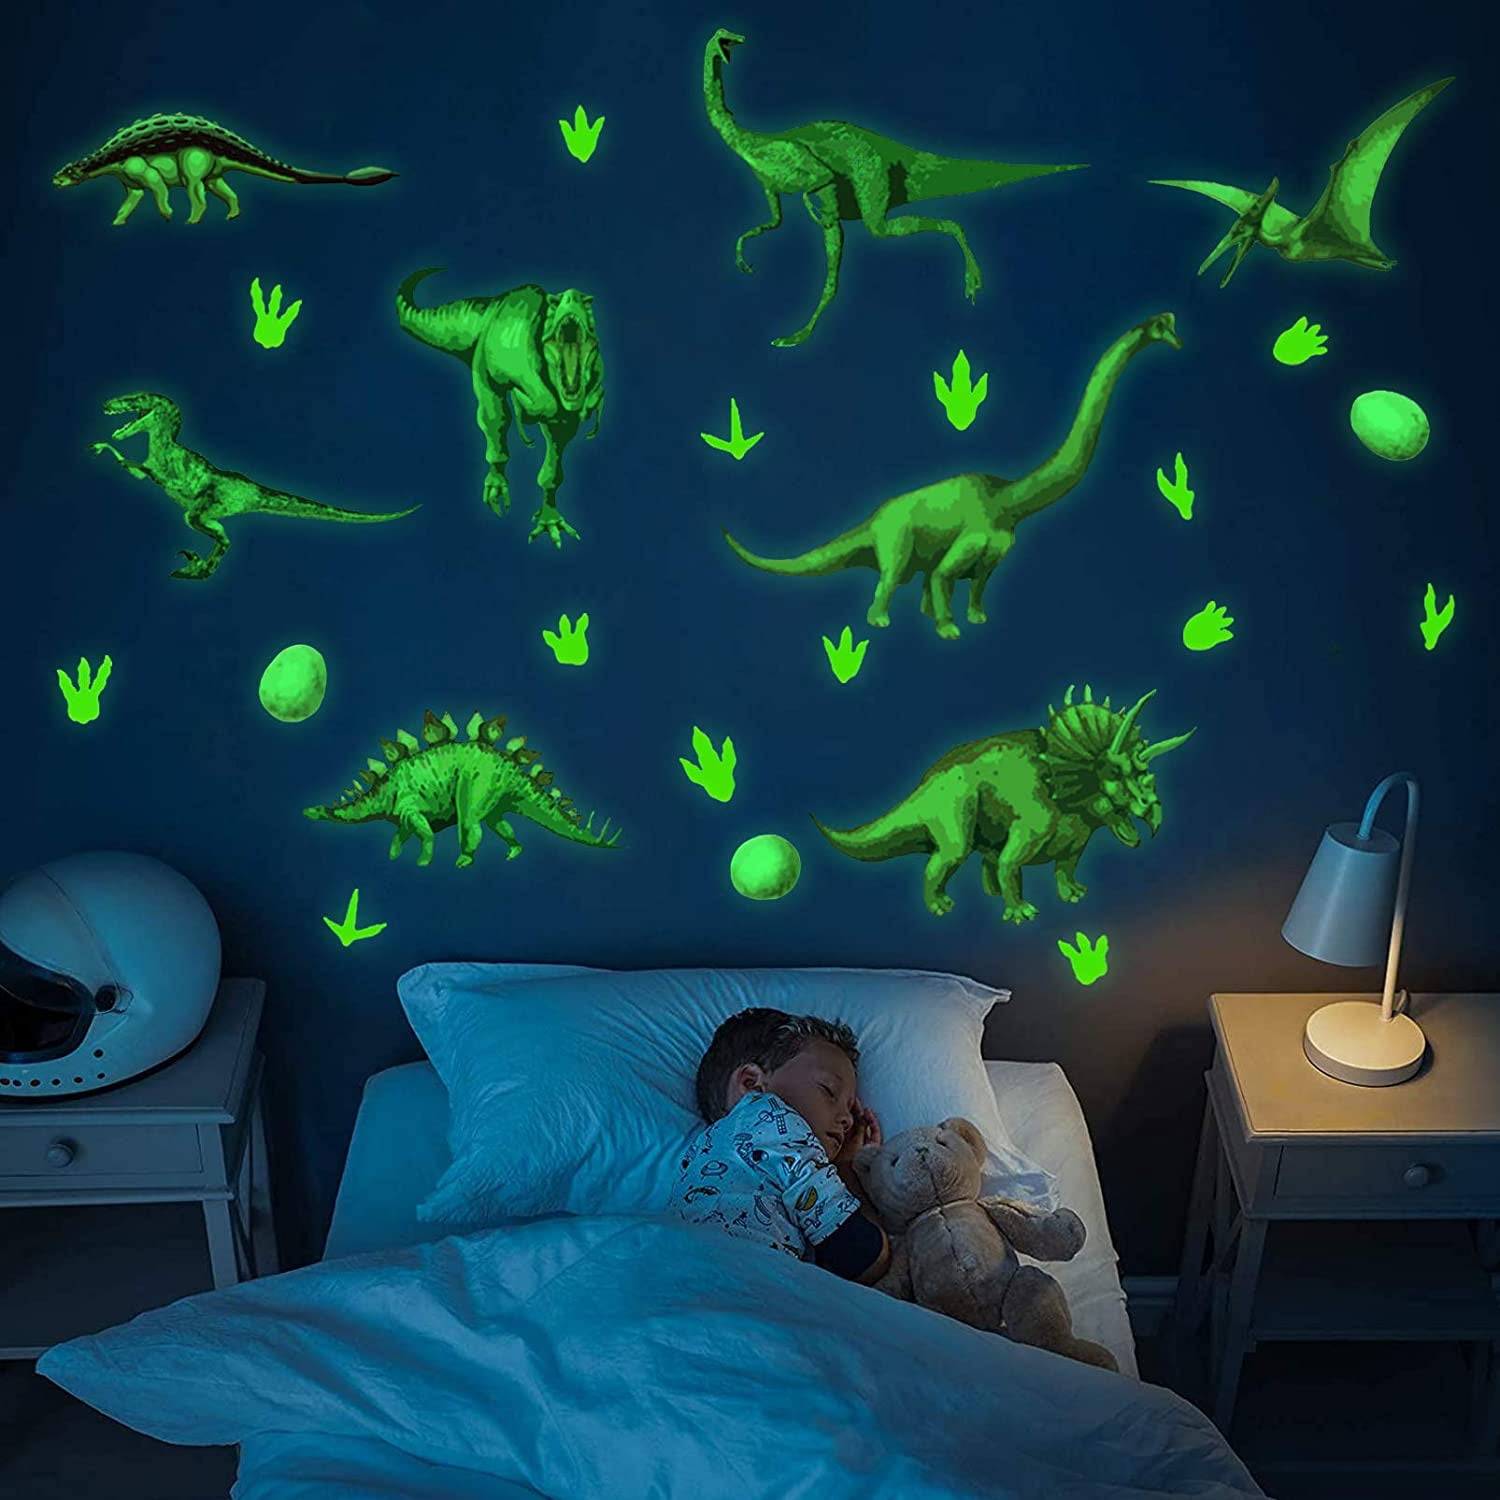 Glowing Dinosaurs All The Way